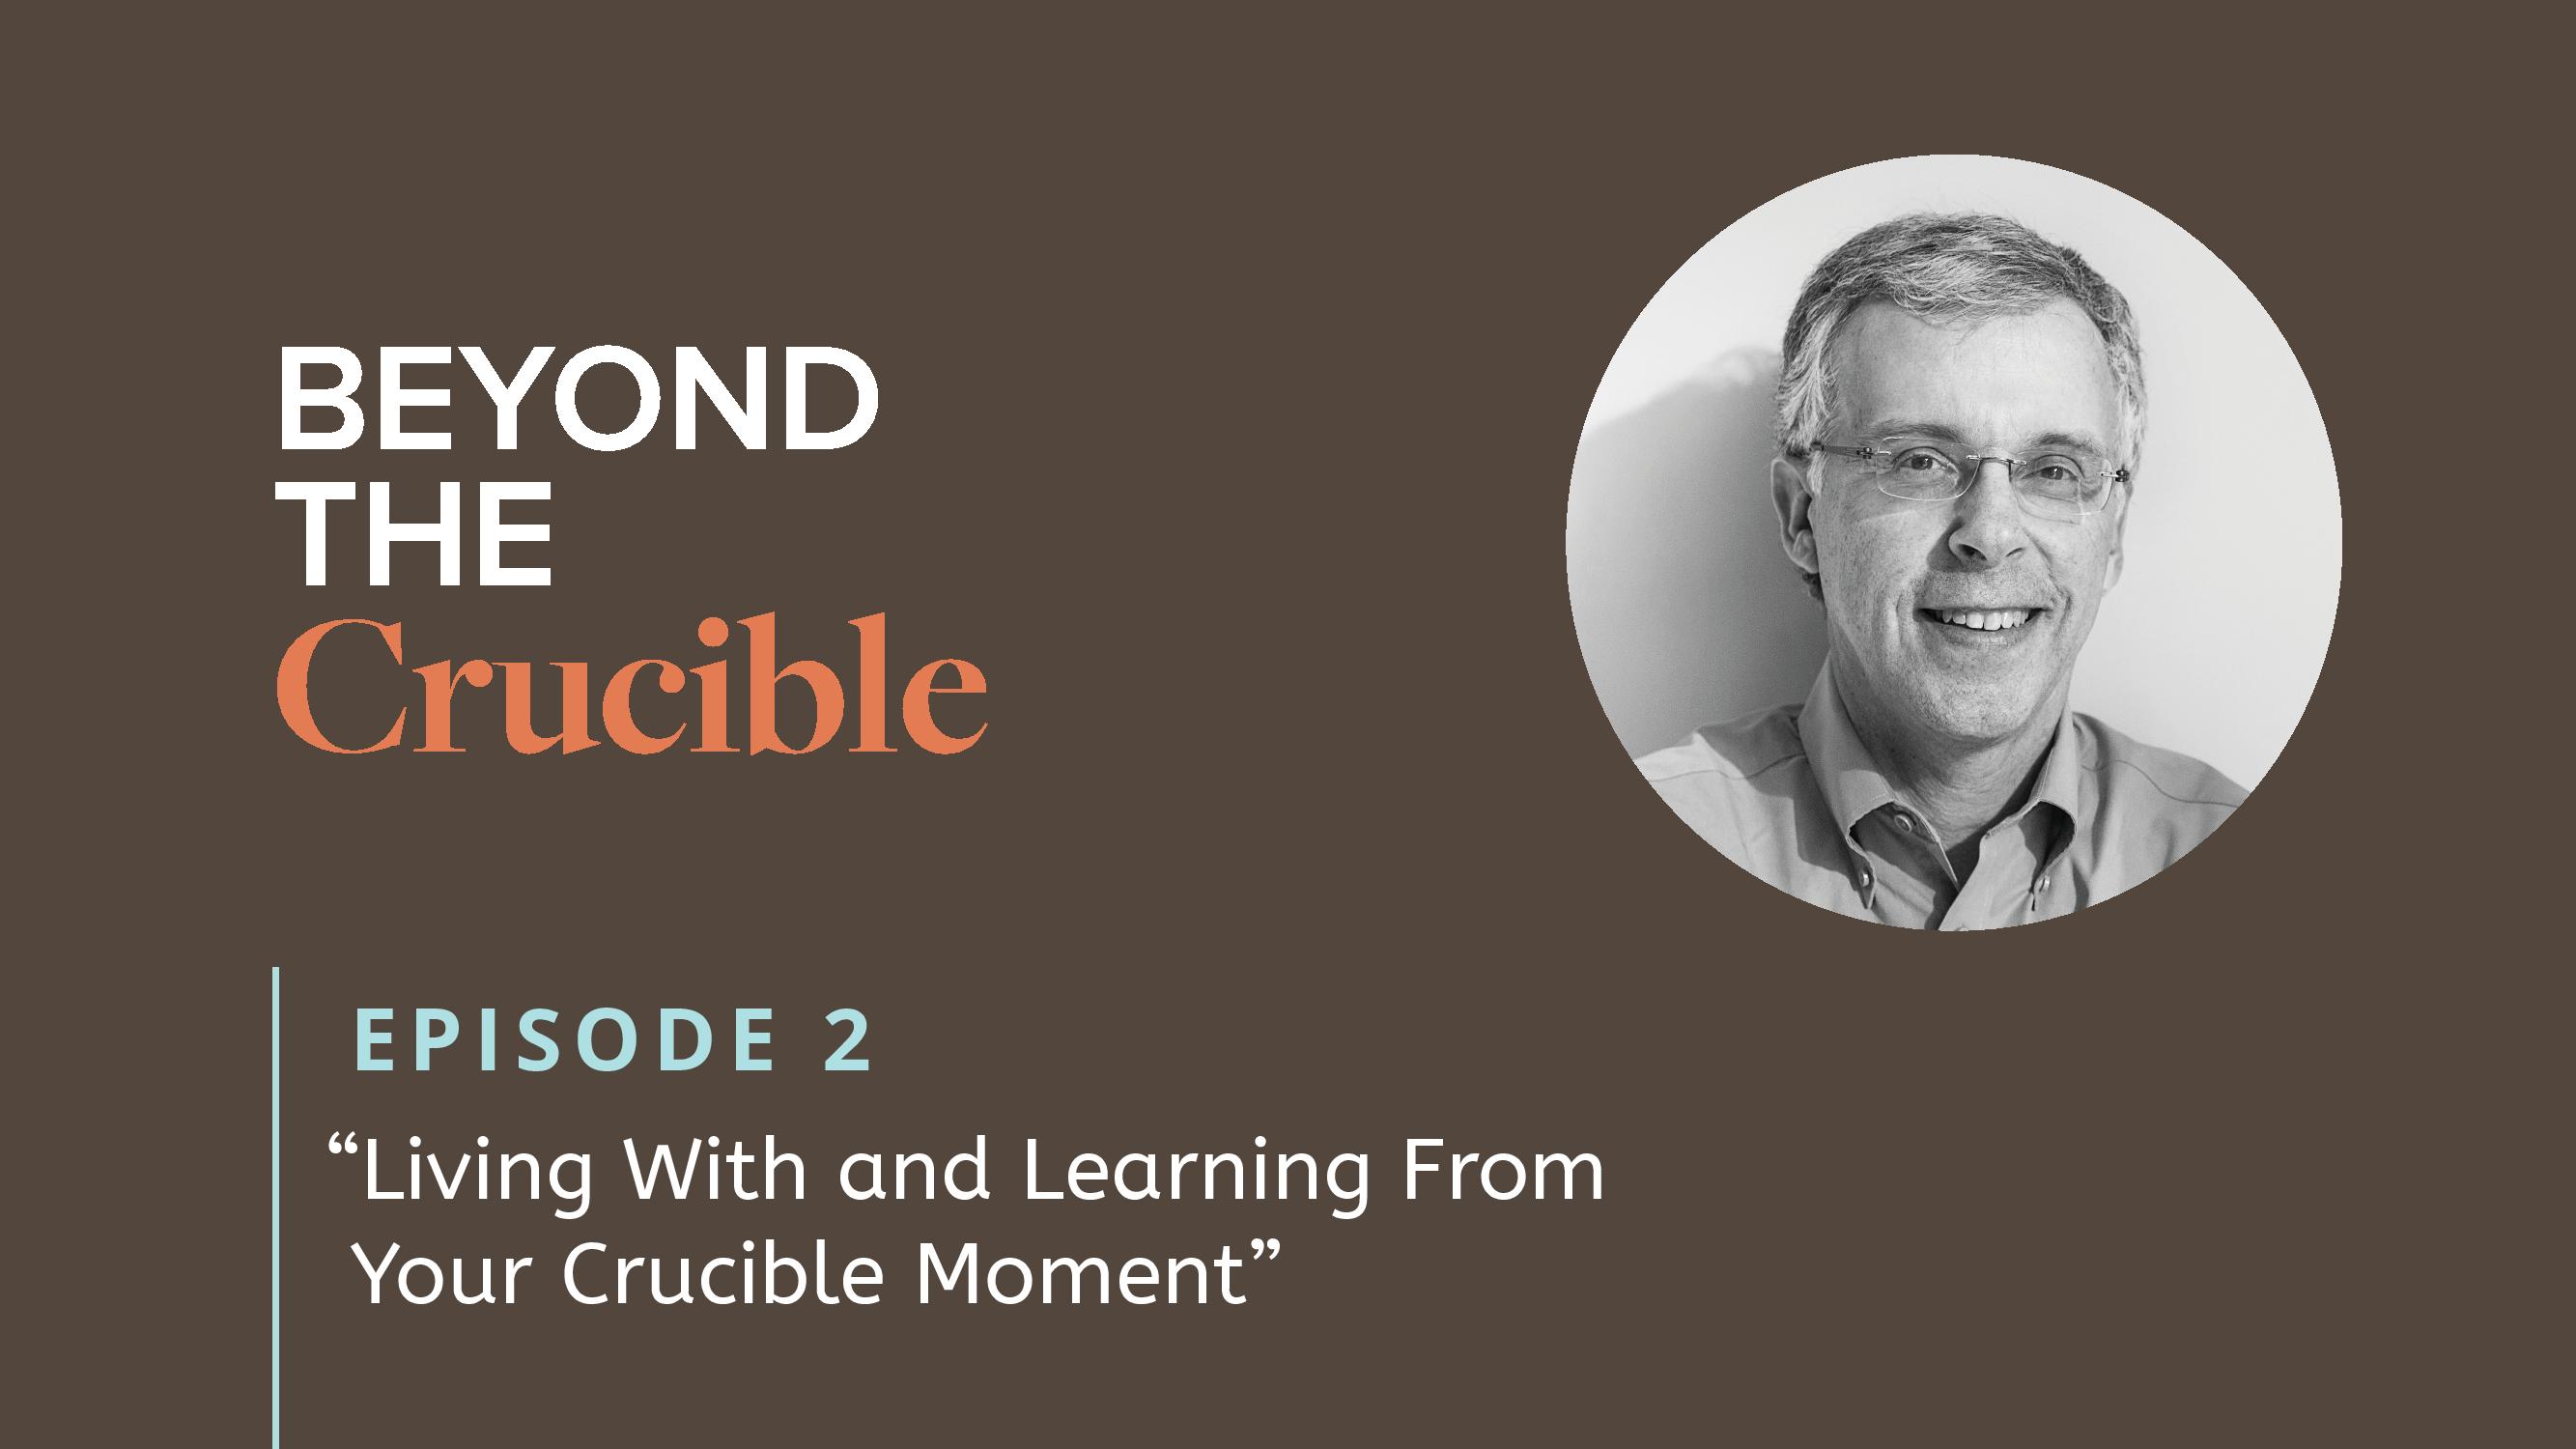 Living with and Learning From Your Crucible Moment